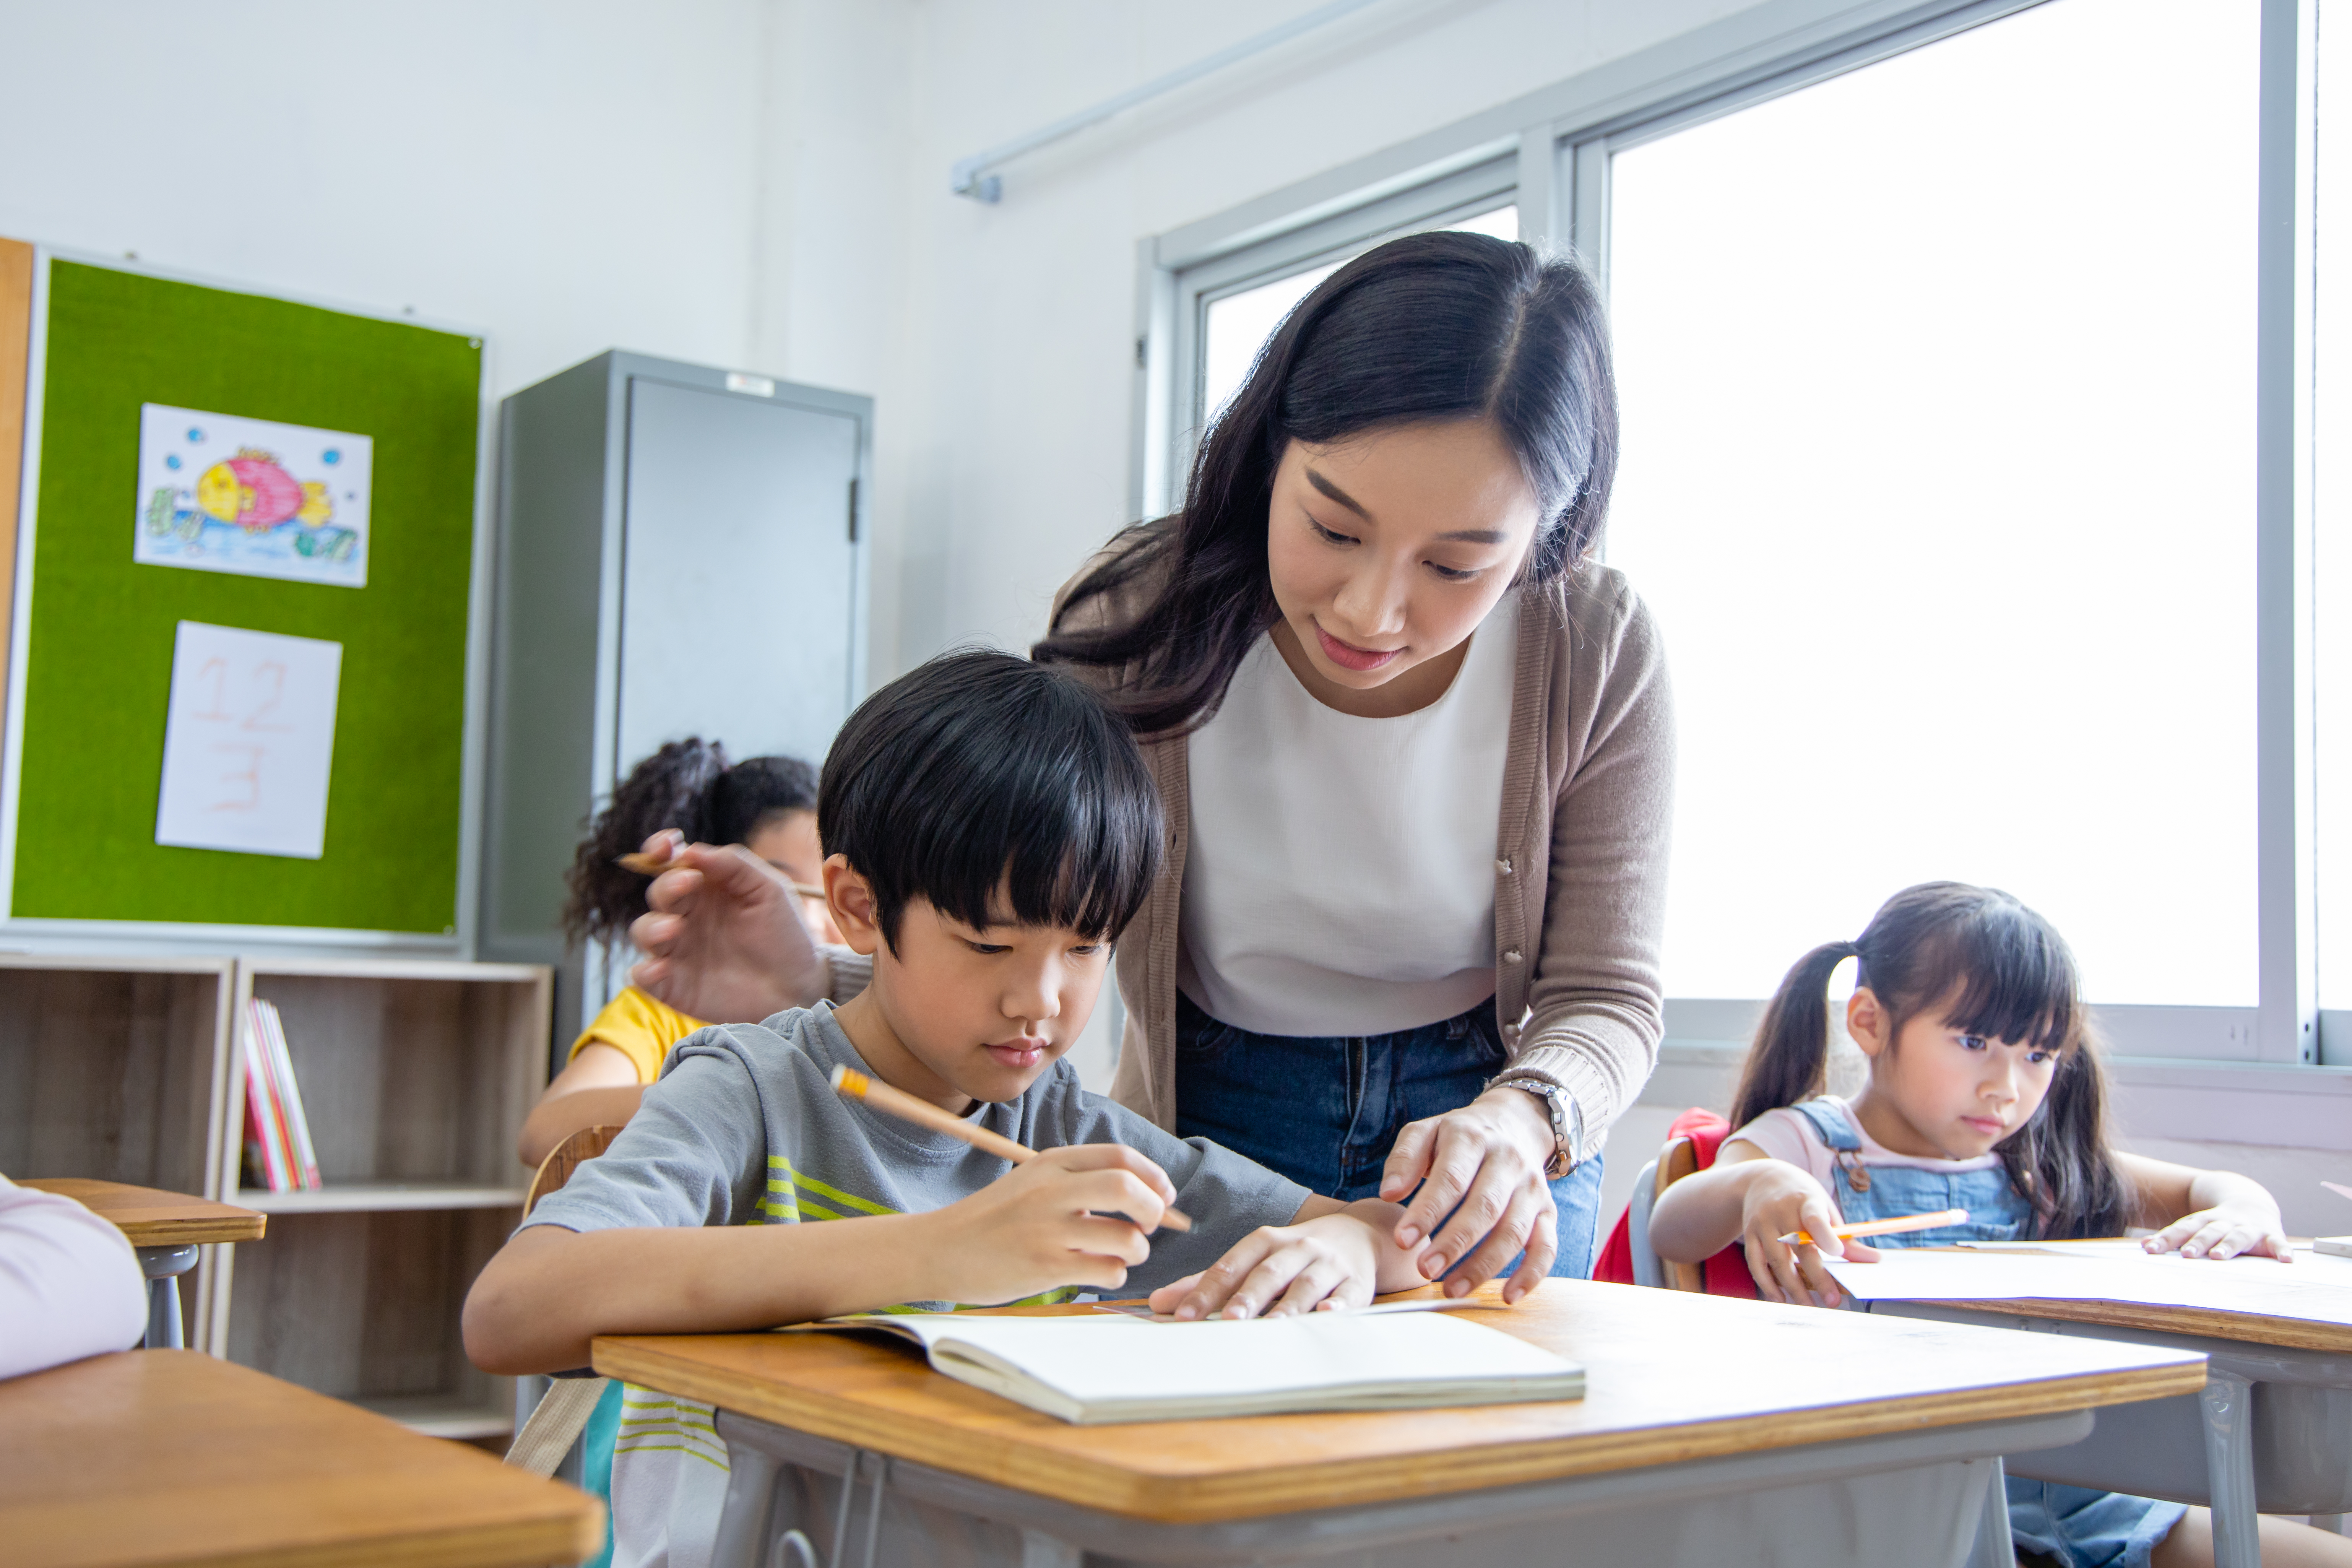 What Are the Top 3 Benefits of Enrolling Your Primary School Child in a Chinese Enrichment Class?